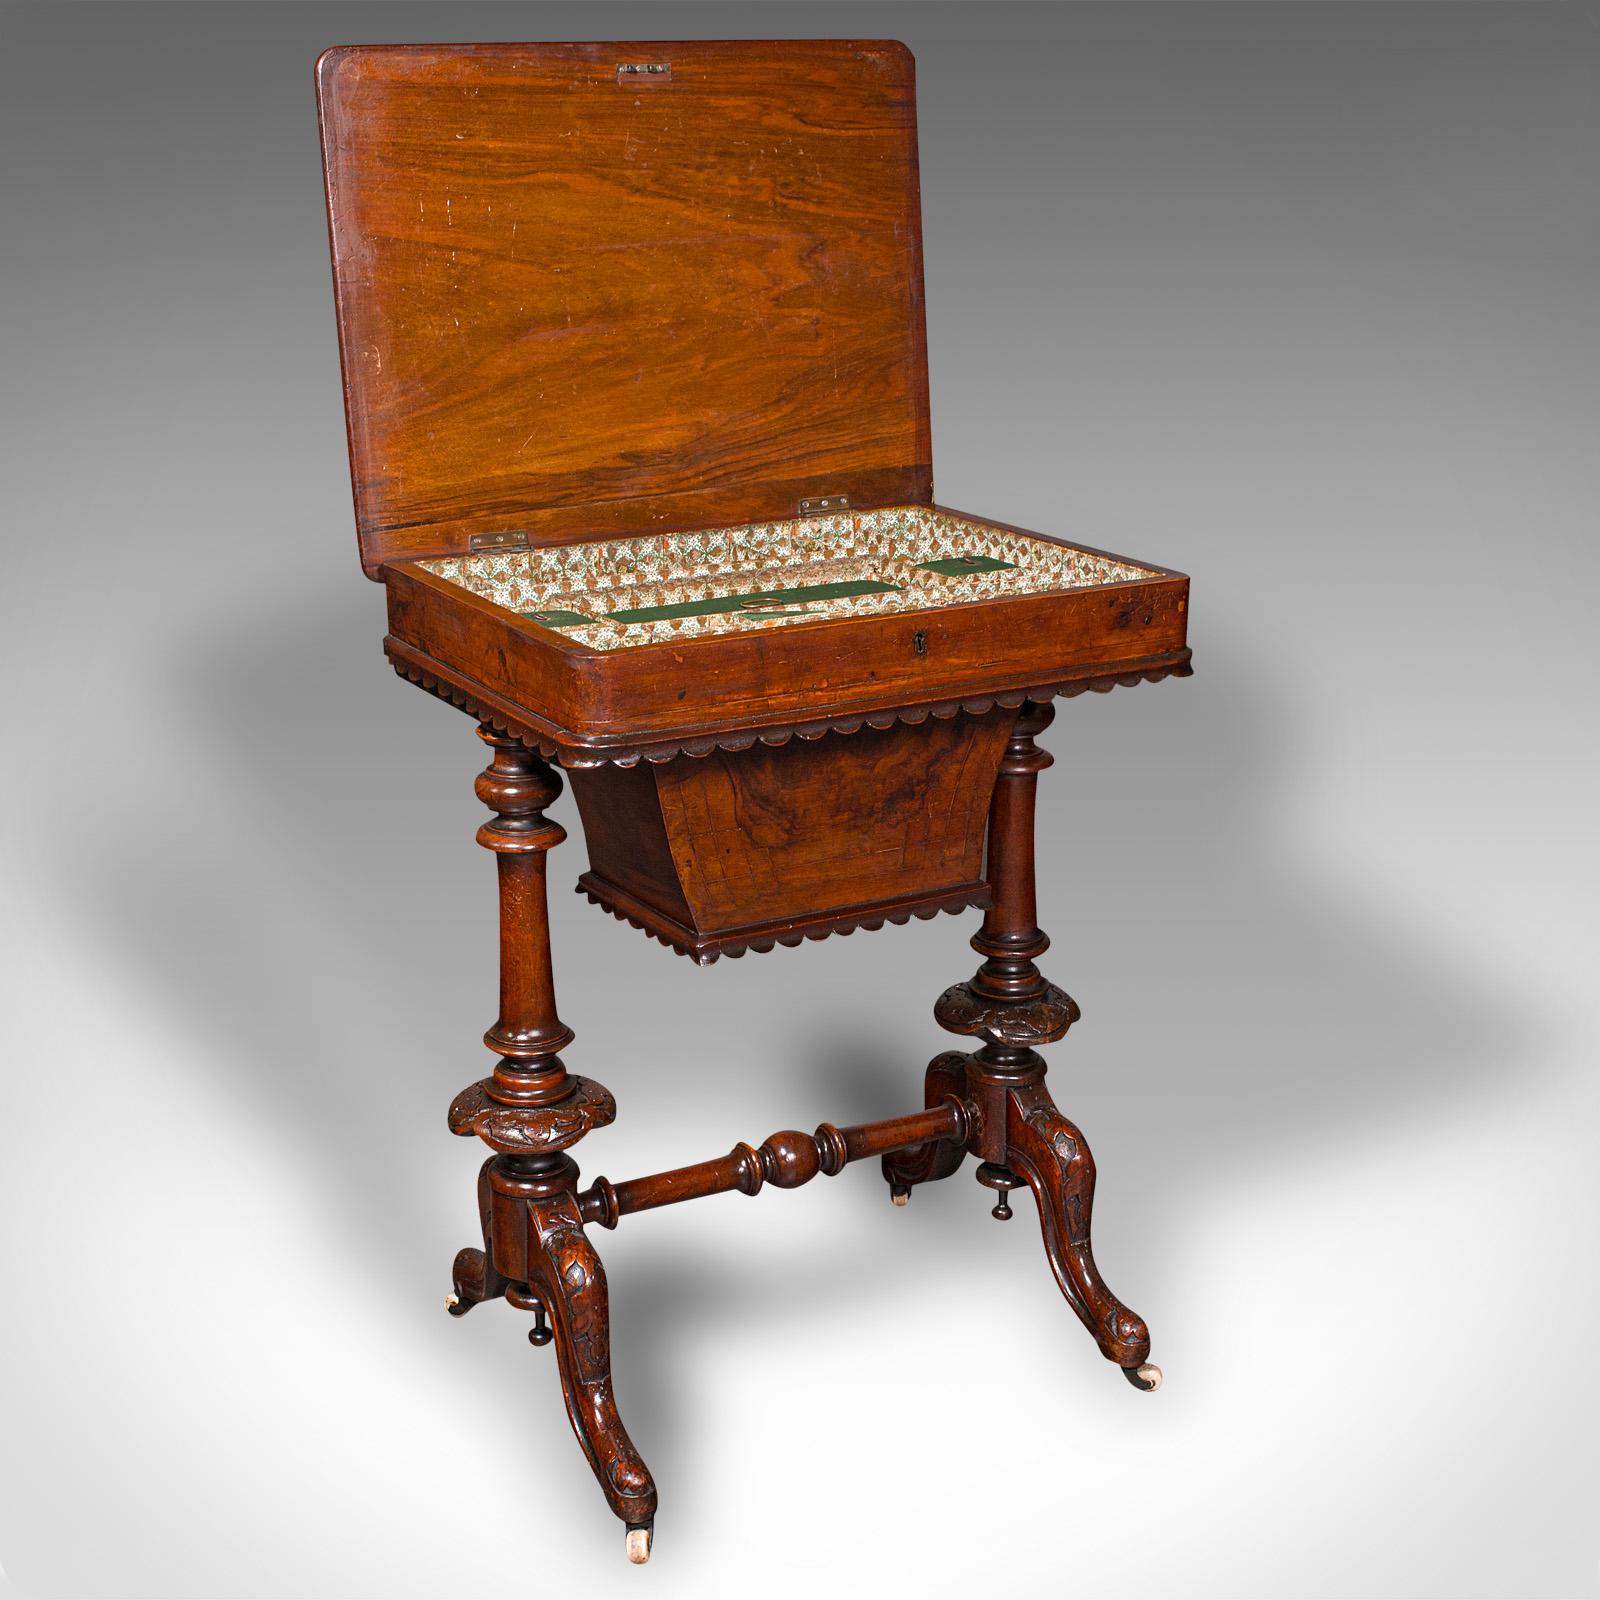 This is an antique ladies work table. An English, burr walnut ladies sewing table, dating to the early Victorian period, circa 1850.

Eye-catching form and finish, with great colour
Displaying a desirable aged patina and in good order
Burr walnut